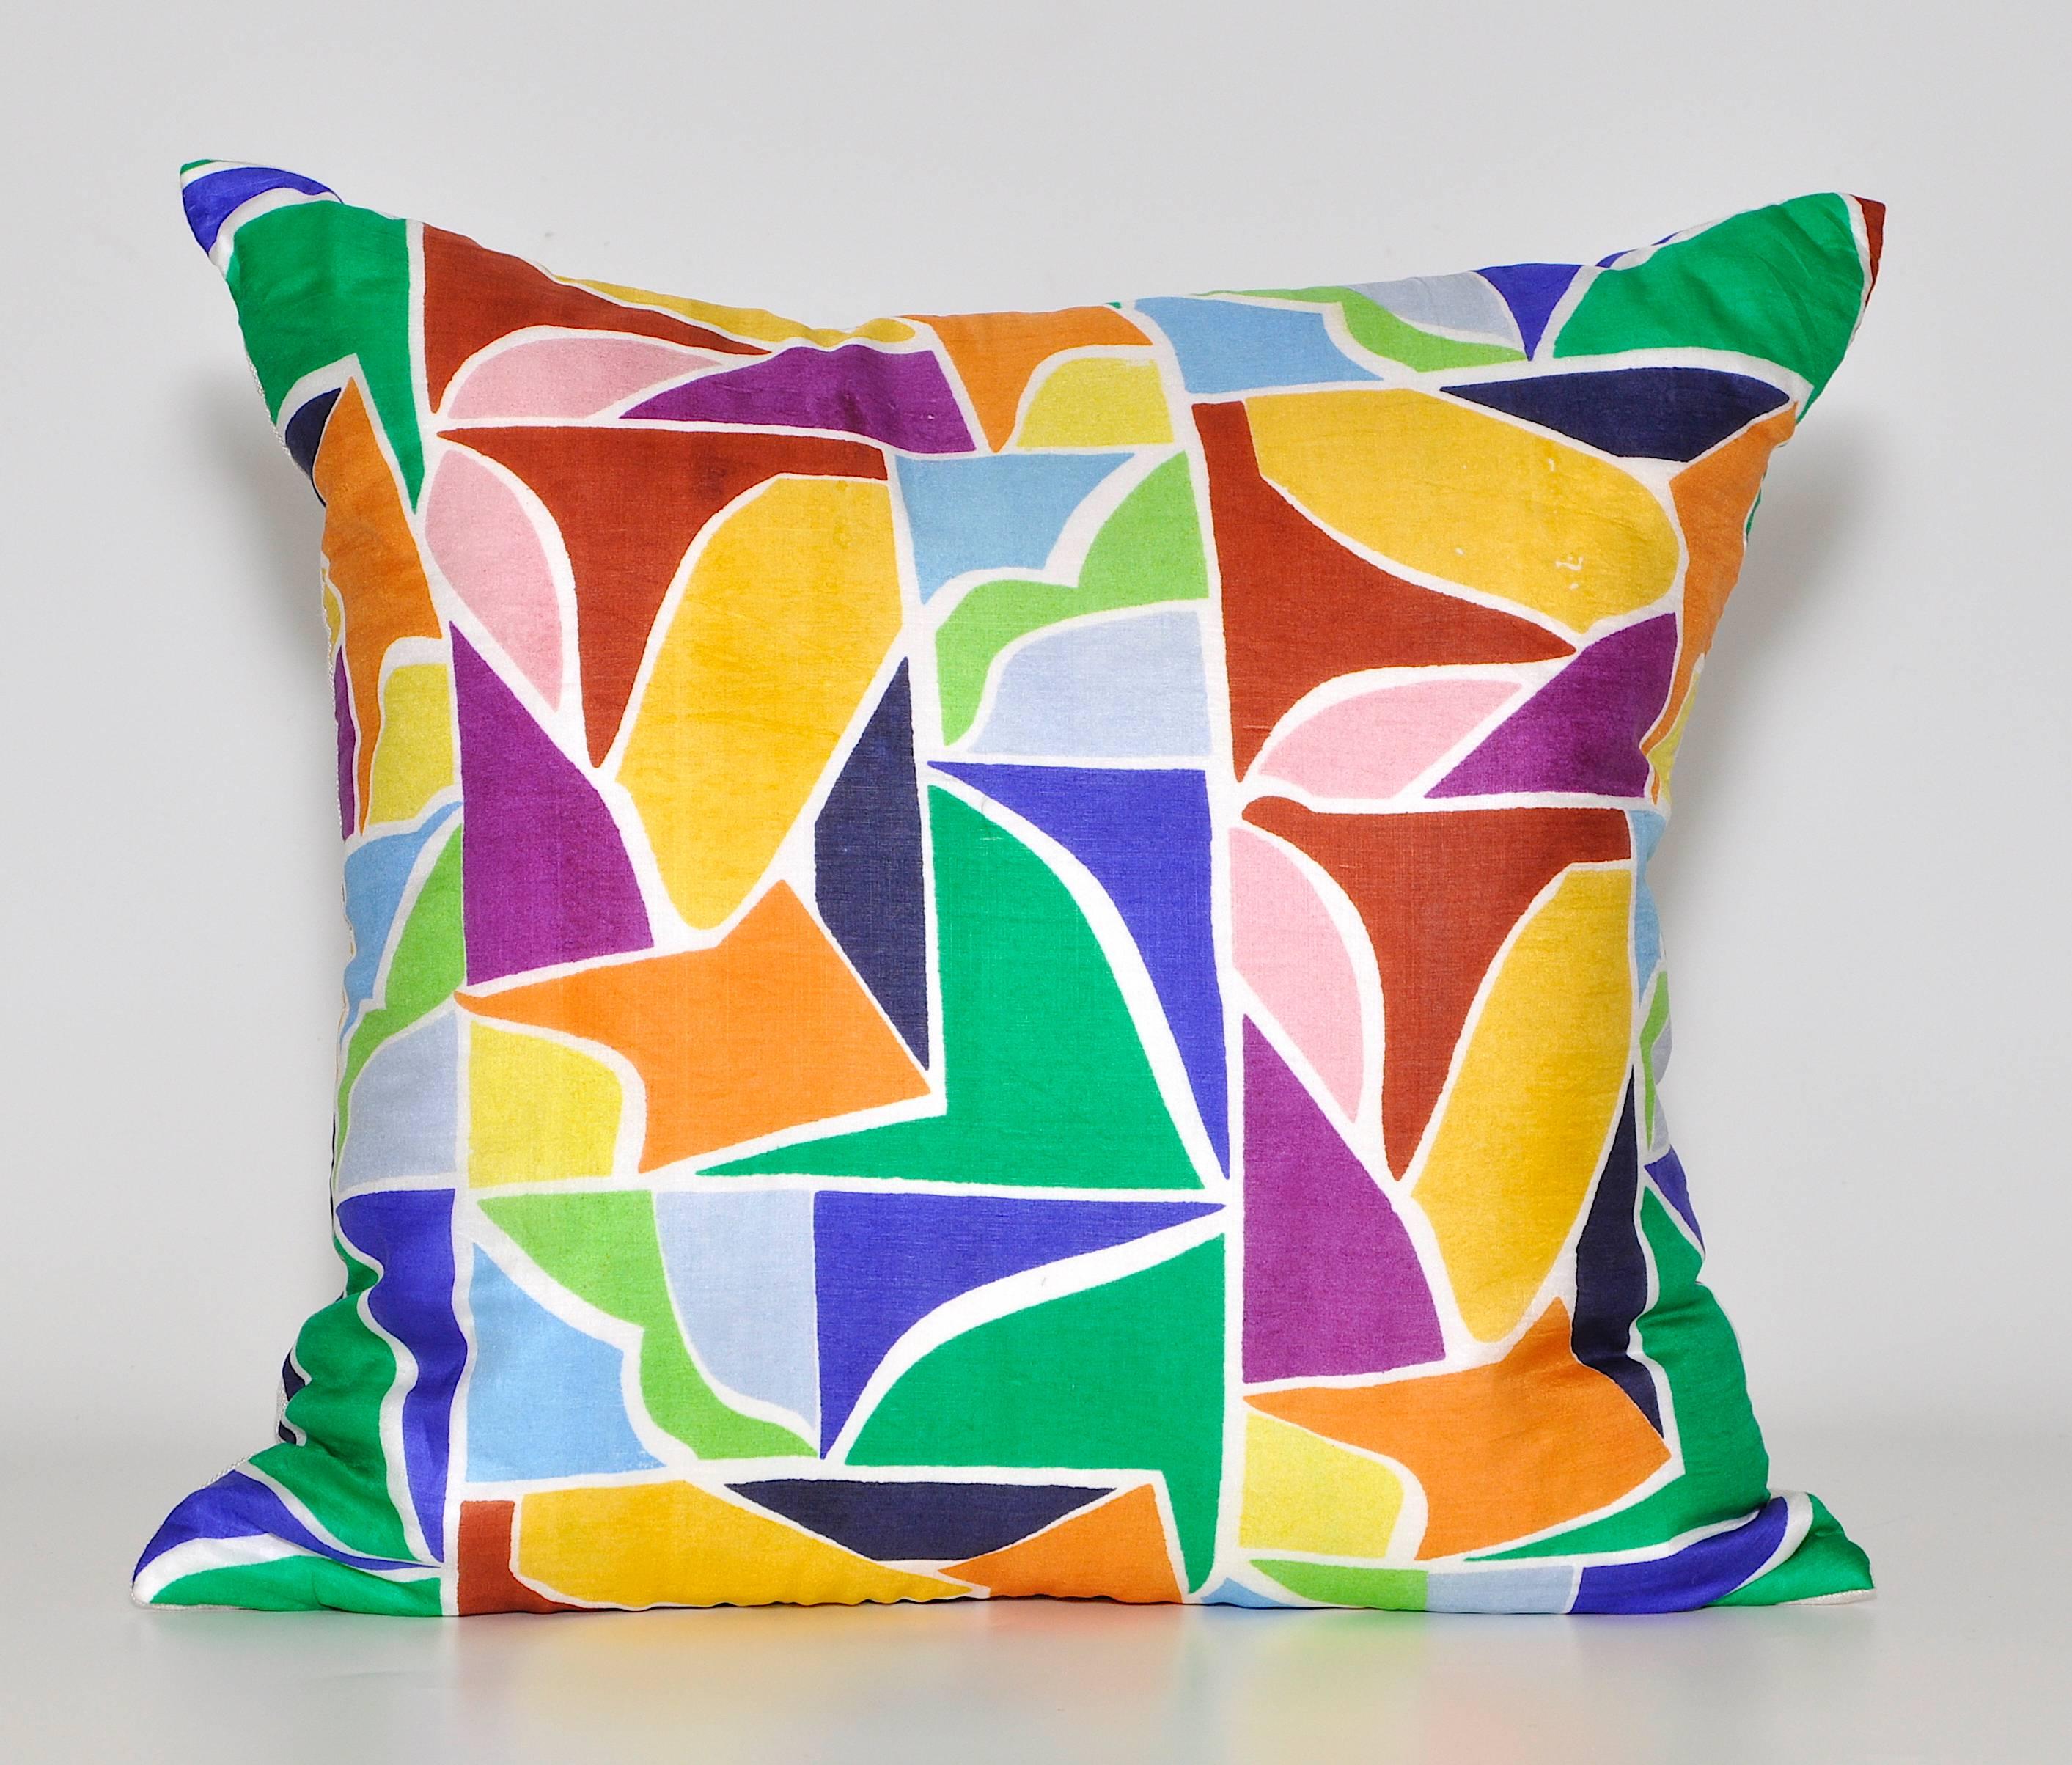 Unique pair of custom-made one-of-a-kind cushions (pillows) created from a stunning vintage silk 1960s fashion scarf in an eye catching multicoloured geometric pattern. The design is reminiscent of stained glass with strong hues emphasised and